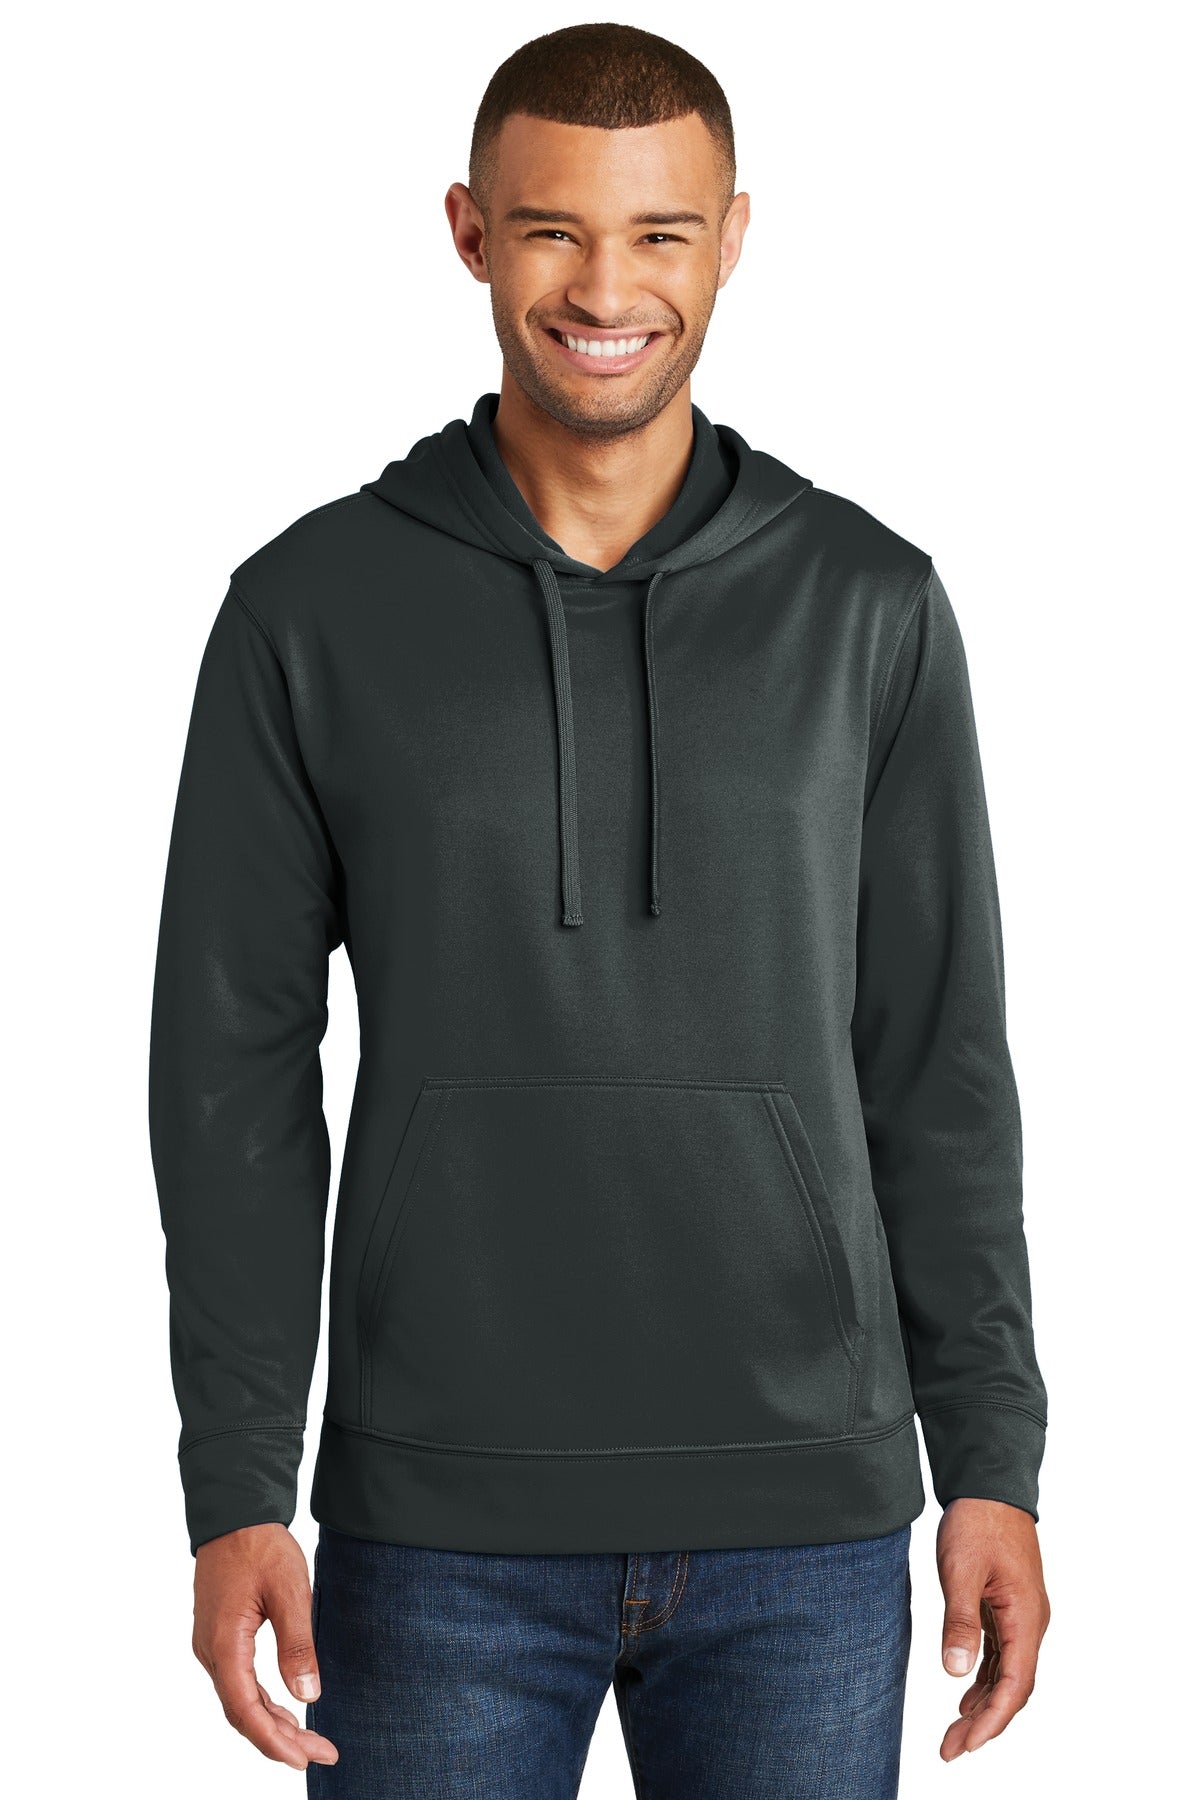 Performance Fleece Pullover Hooded Sweatshirt with Embroidery PC590H